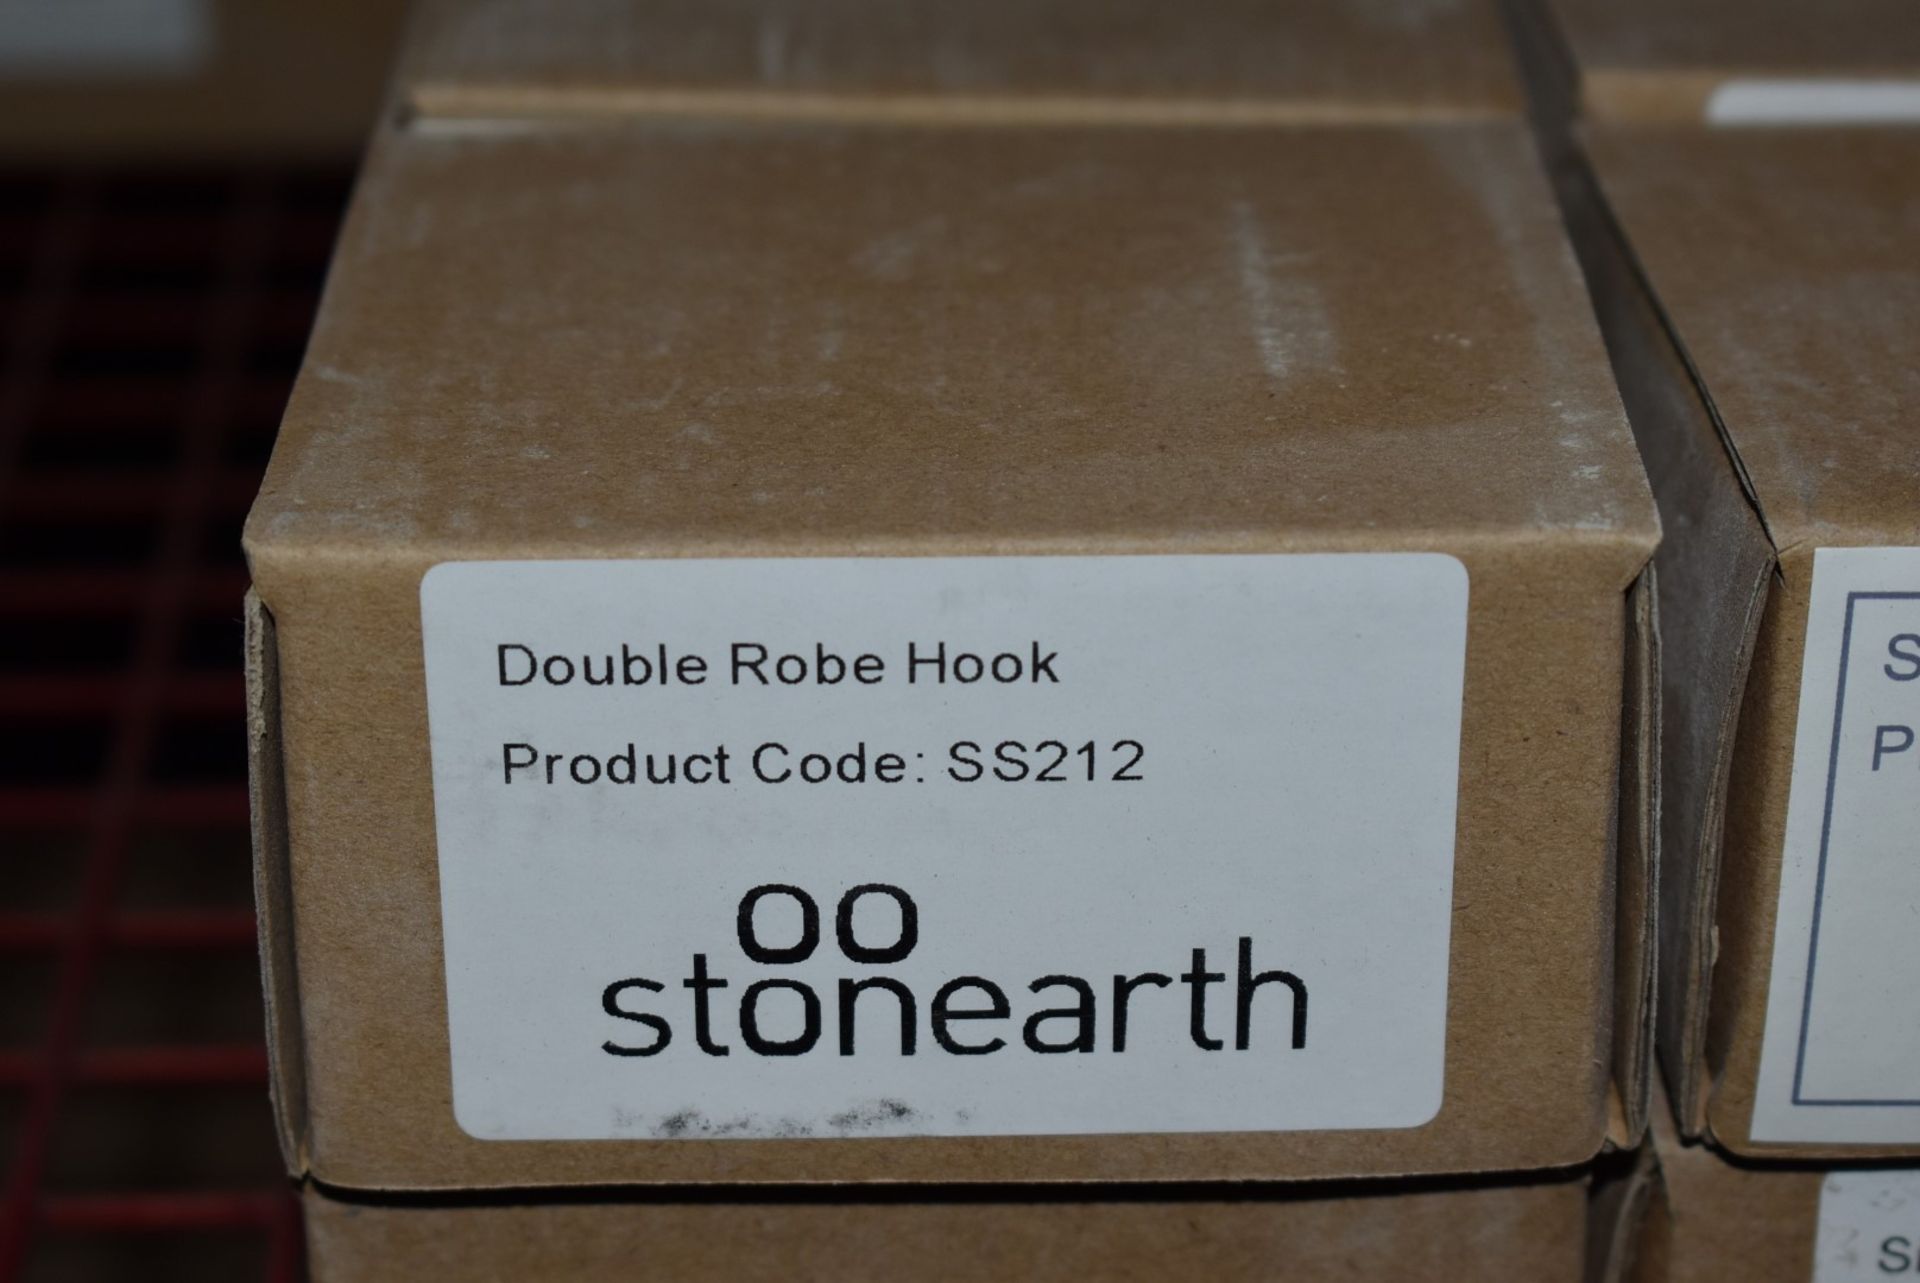 1 x Stonearth Double Robe Hook - Solid Stainless Steel Bathroom Accessory - Brand New & Boxed - Image 3 of 3